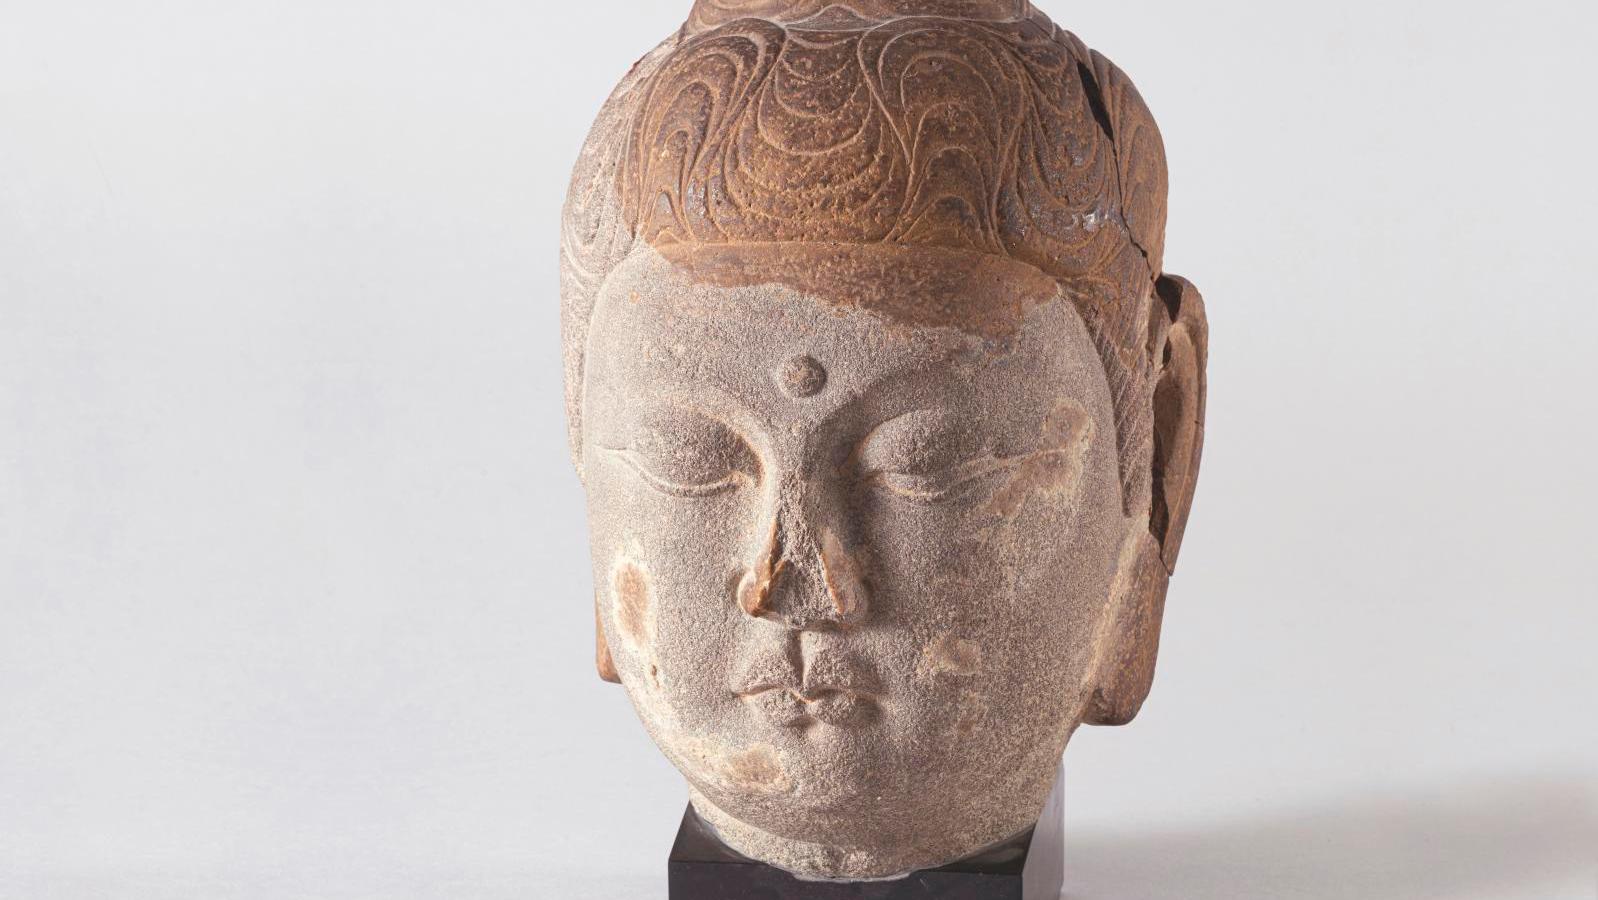 China, Tianlongshan, Tang period (618–907), Buddha’s head, gray sandstone, h. 30... The Serenity of a Rare Buddha from the Tang Period